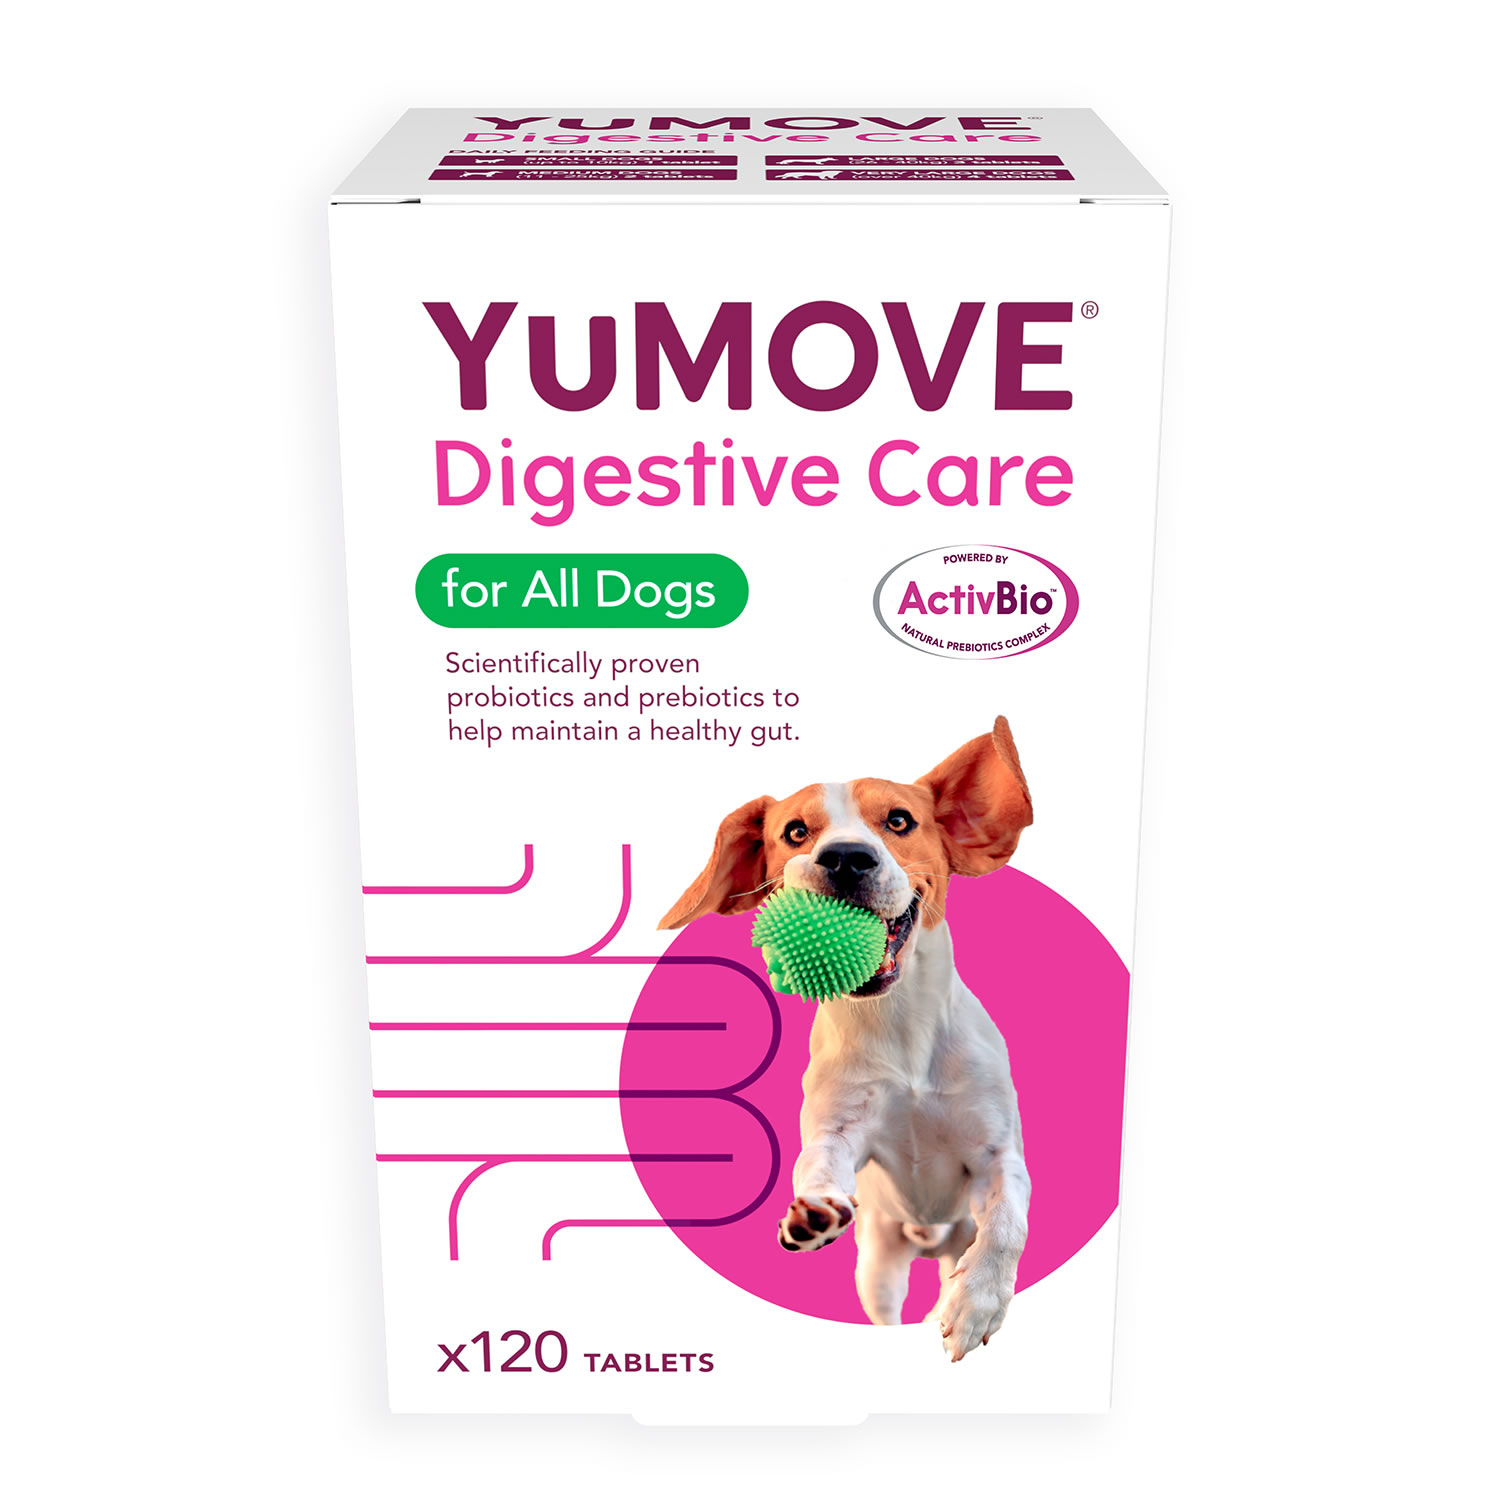 YUMOVE DIGESTIVE CARE FOR ALL DOGS